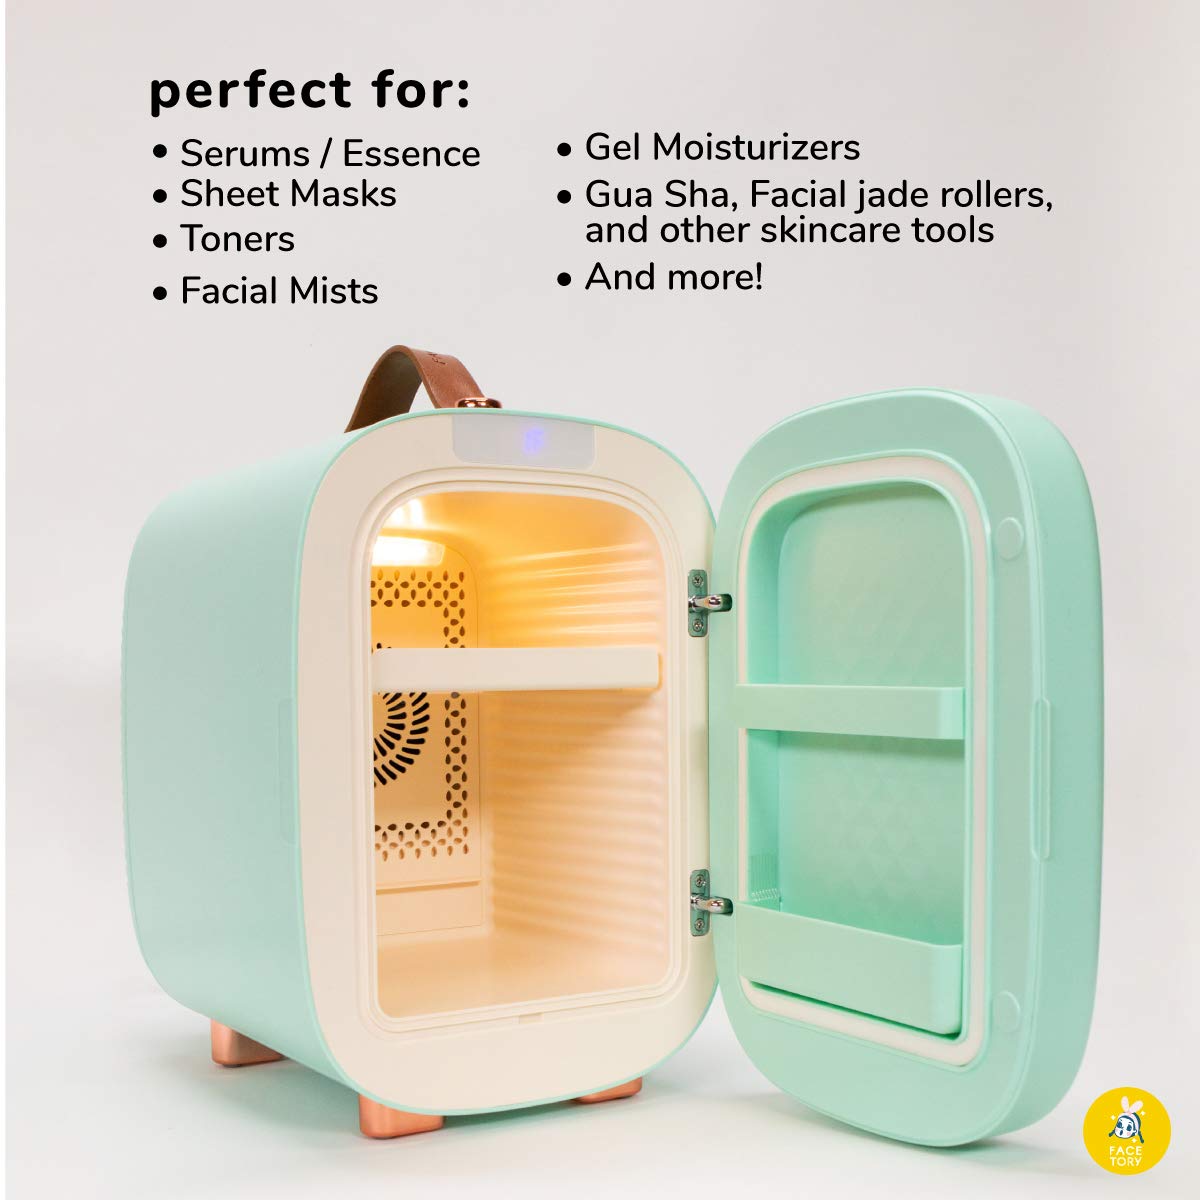 FACETORY Mint Skincare Fridge- Ice Cream Series- 5 Liters with LED Light, Temperature Display, Silent Mode for Dorm Room, Bedroom, Office